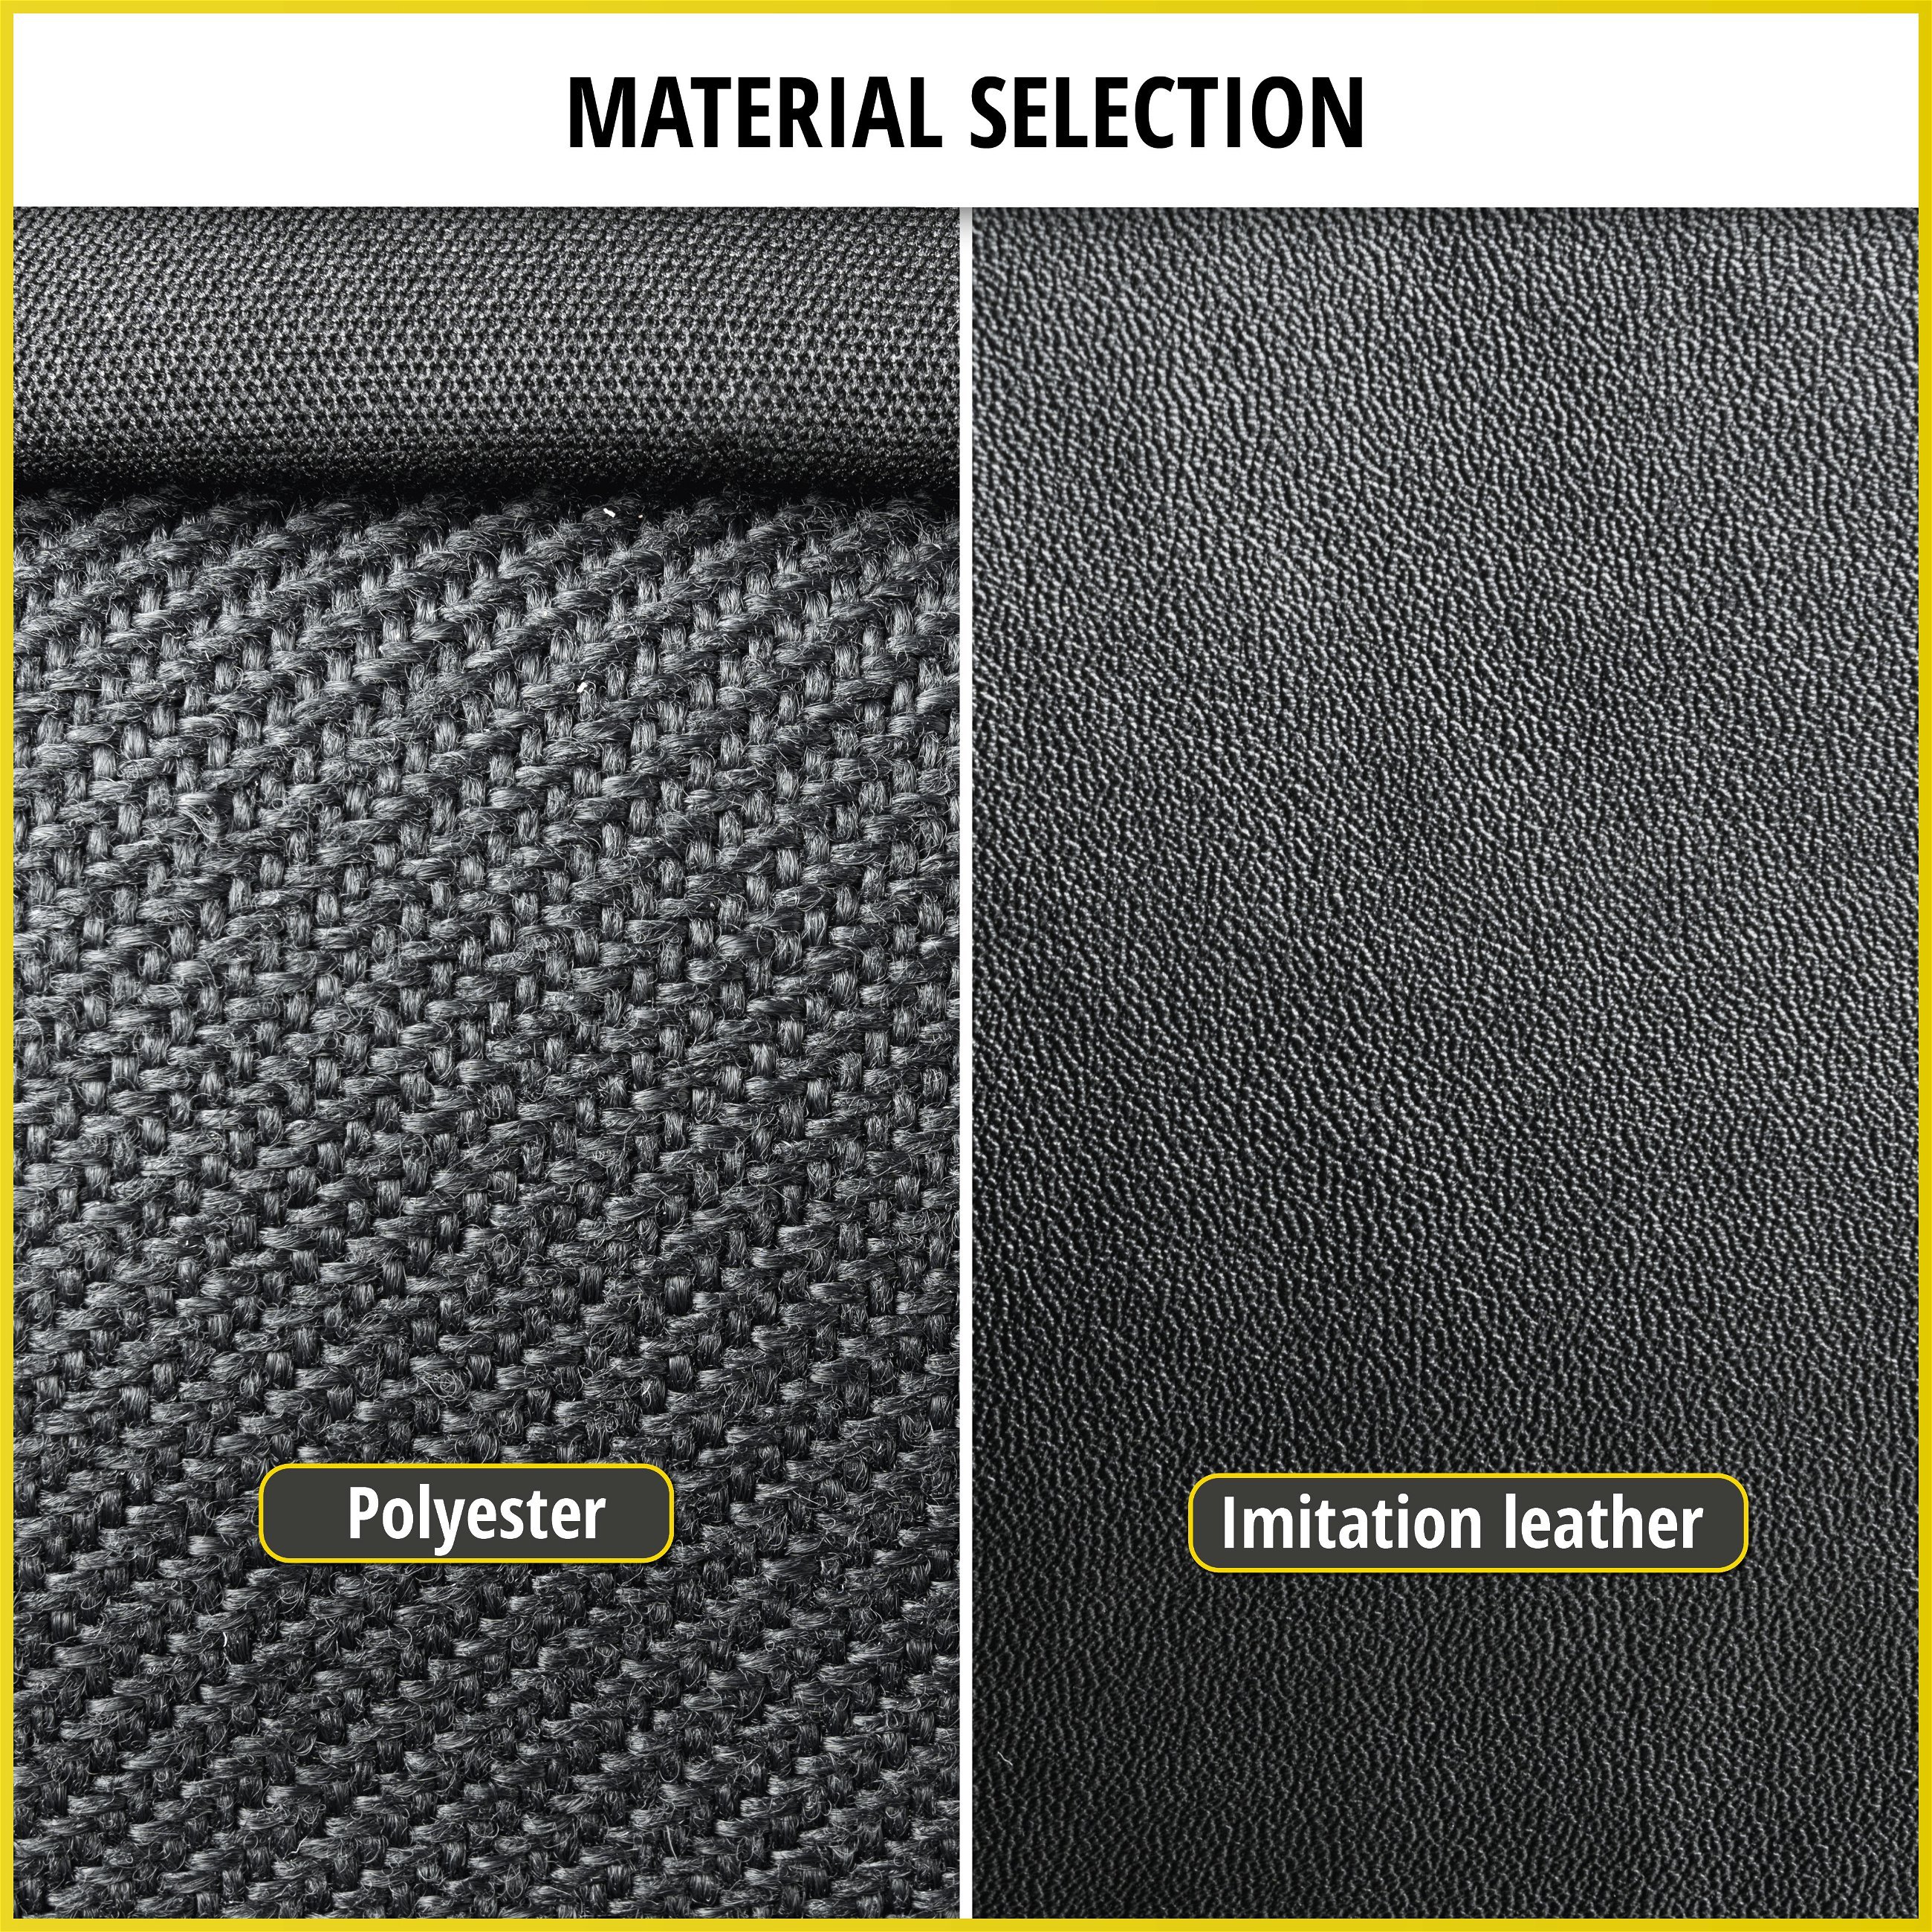 Seat cover made of imitation leather for VW T5, single seat cover front with recess for armrest